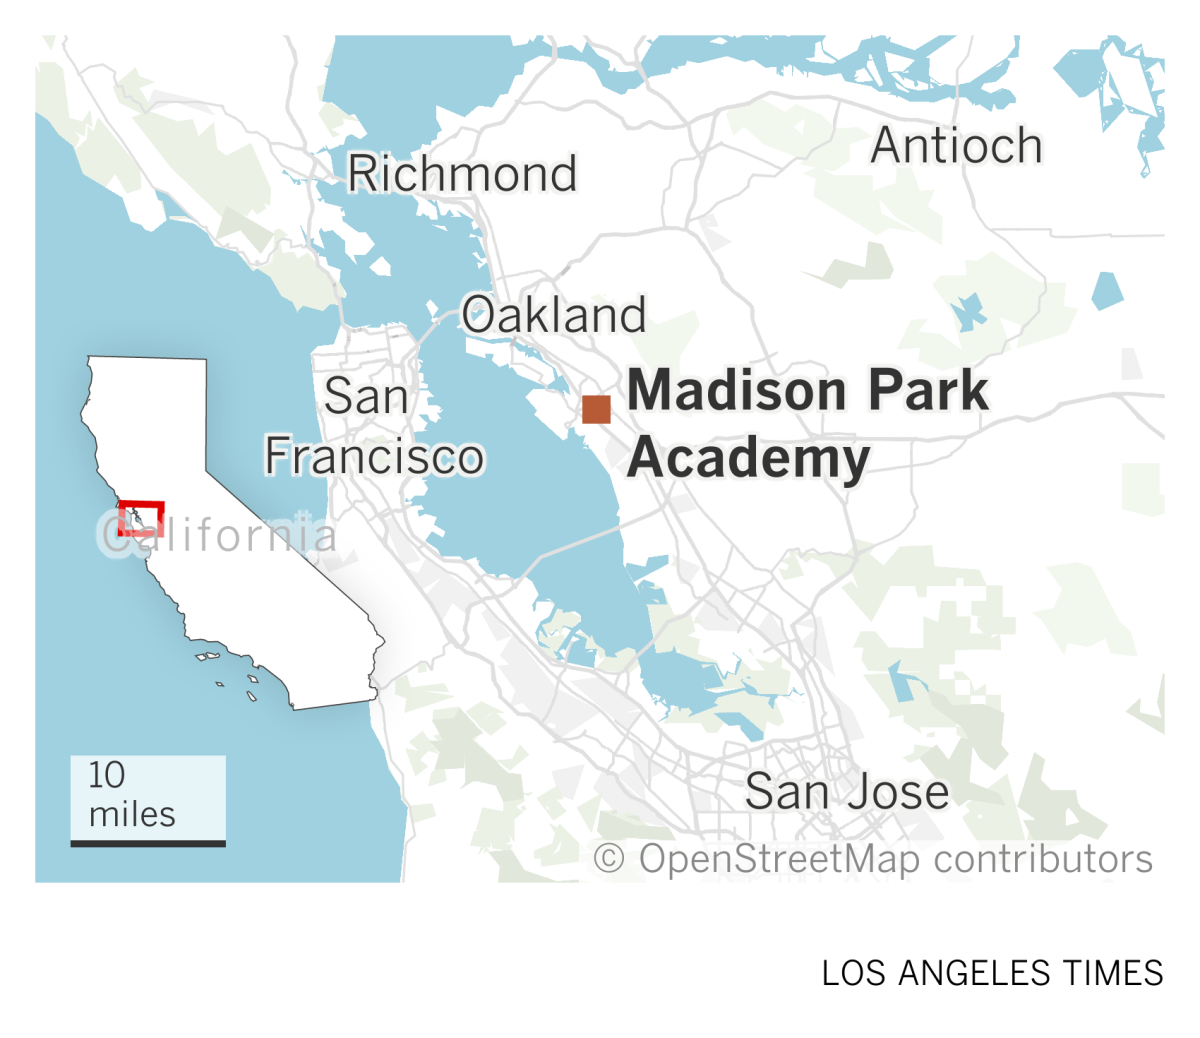 A map of the San Francisco Bay Area shows the location of Madison Park Academy in Oakland